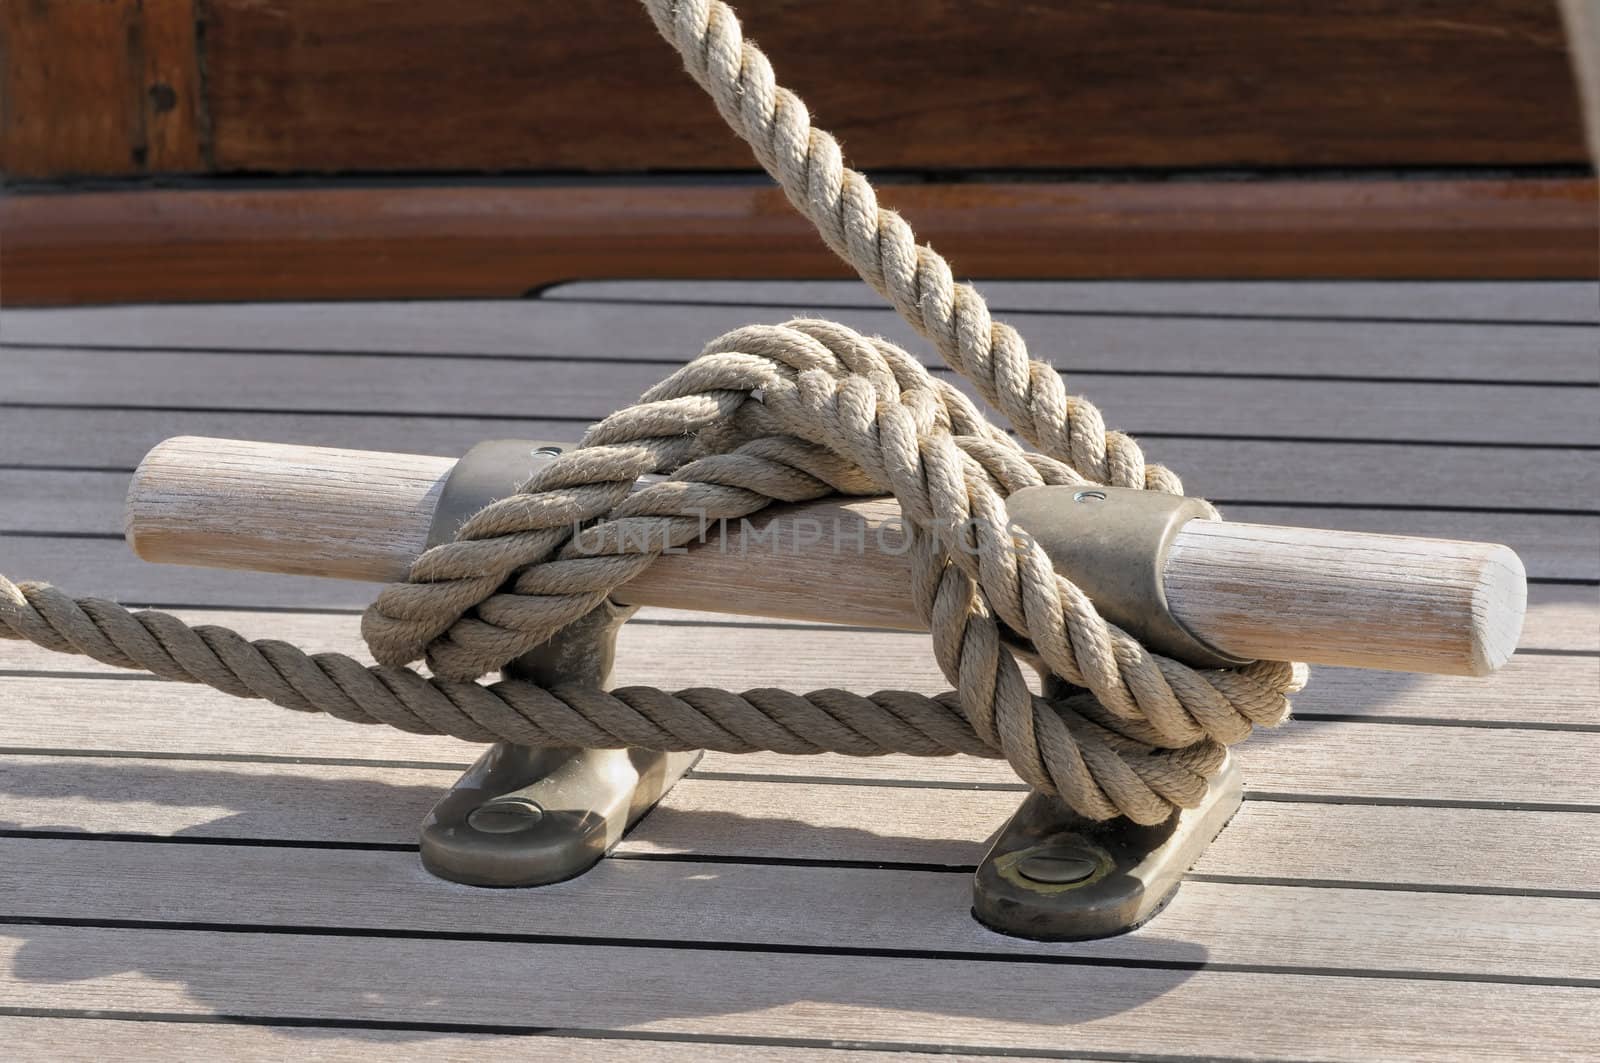 Detail of a rope tied-up on wooden bitt securing boat to dock